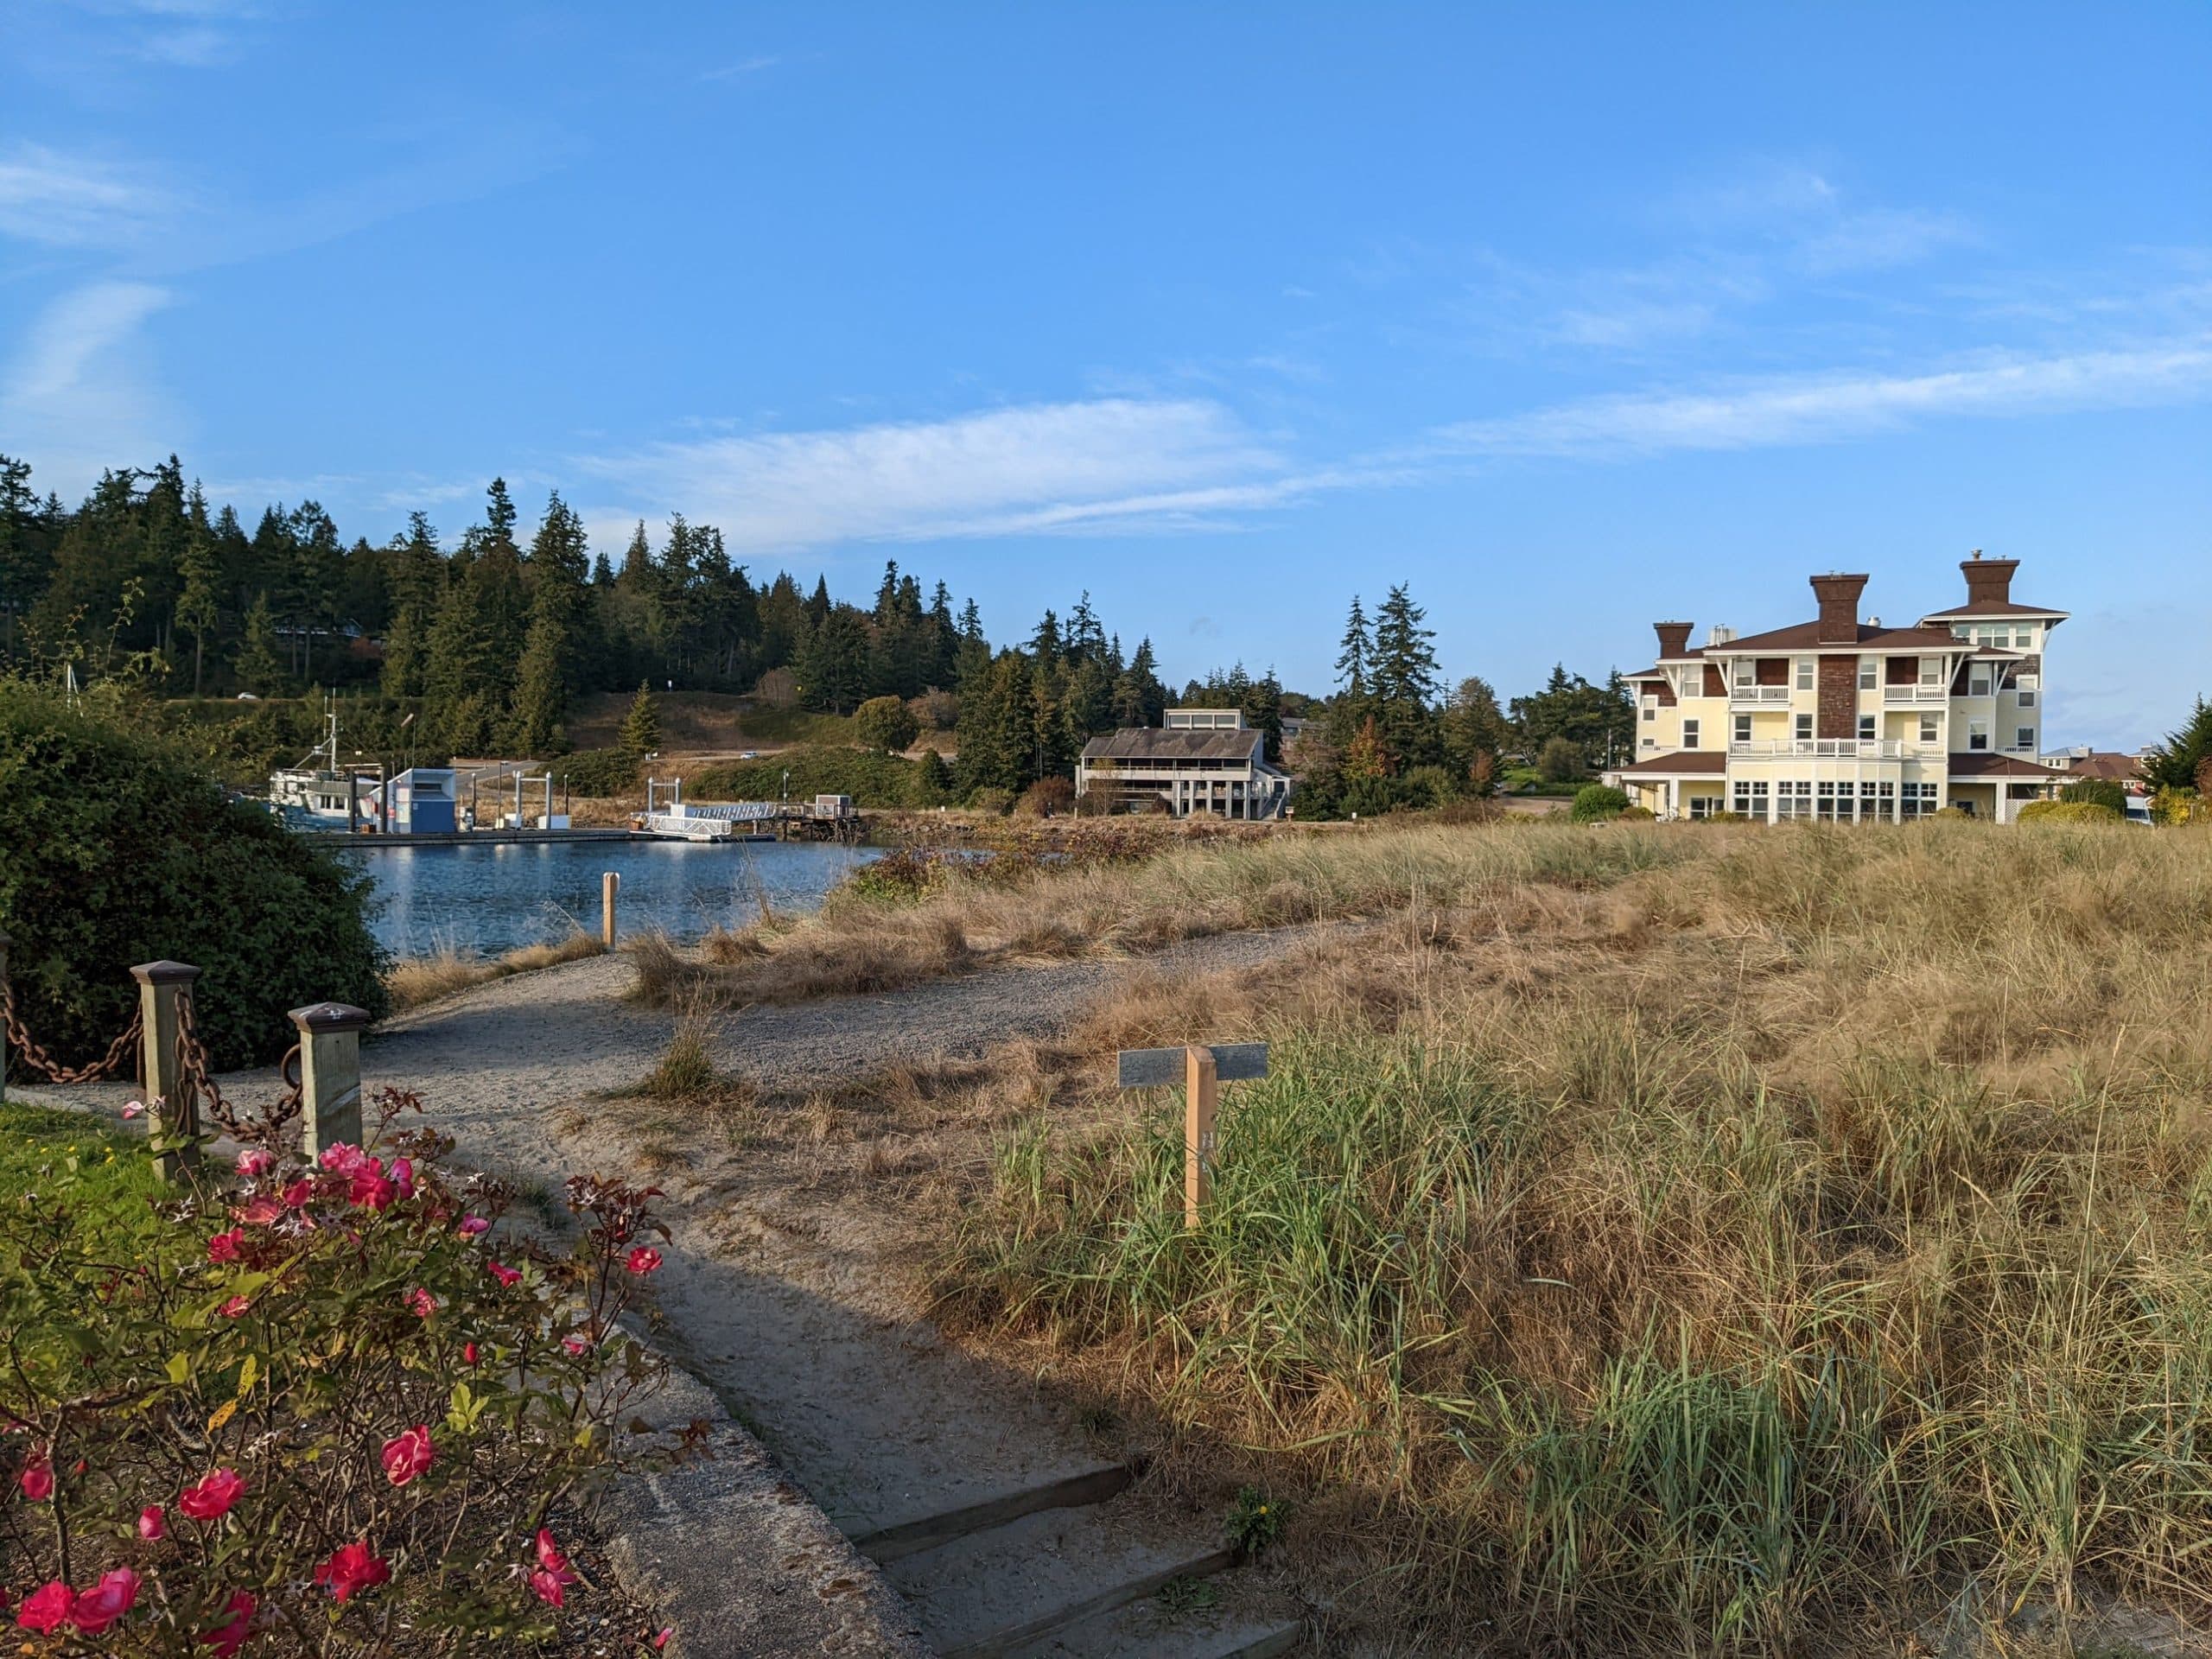 The Inn at Port Ludlow was surrounded by beautiful landscapes and trails